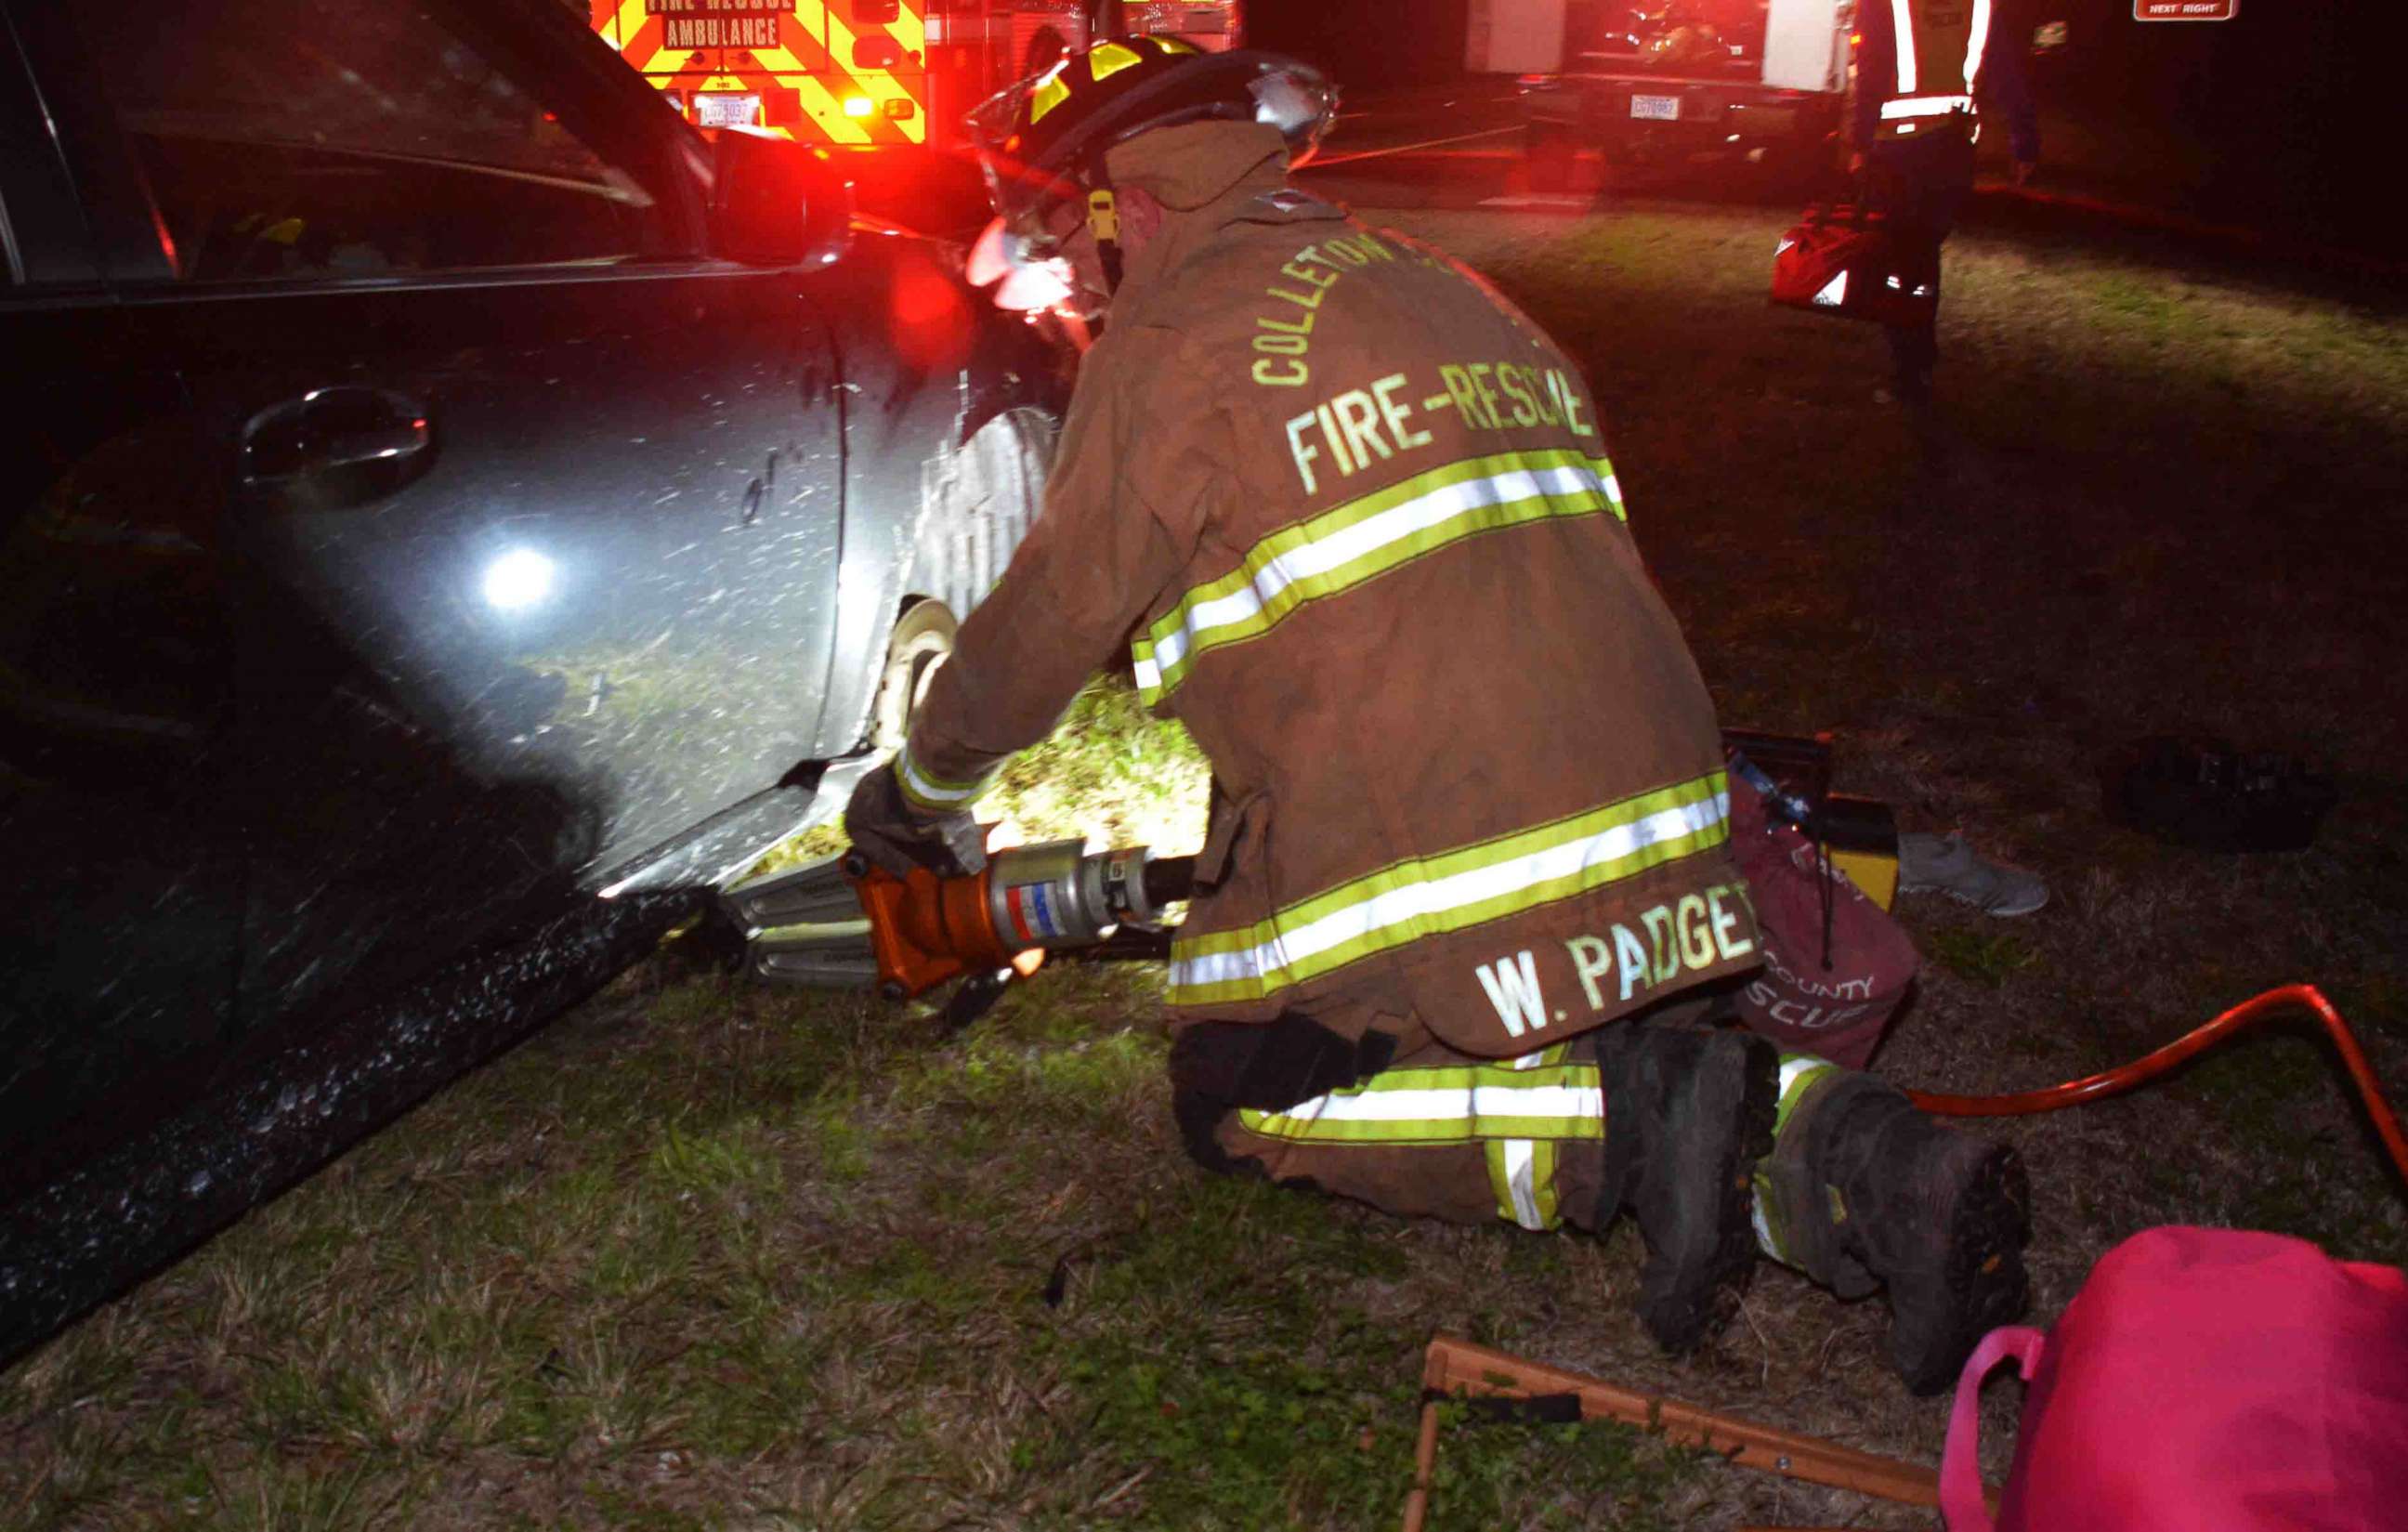 PHOTO: This image was released by Colleton County Fire-Rescue in South Carolina shows the aftermath of an accident where a woman's hands became trapped between the car tire and fender on Sunday, Feb. 2, 2020.